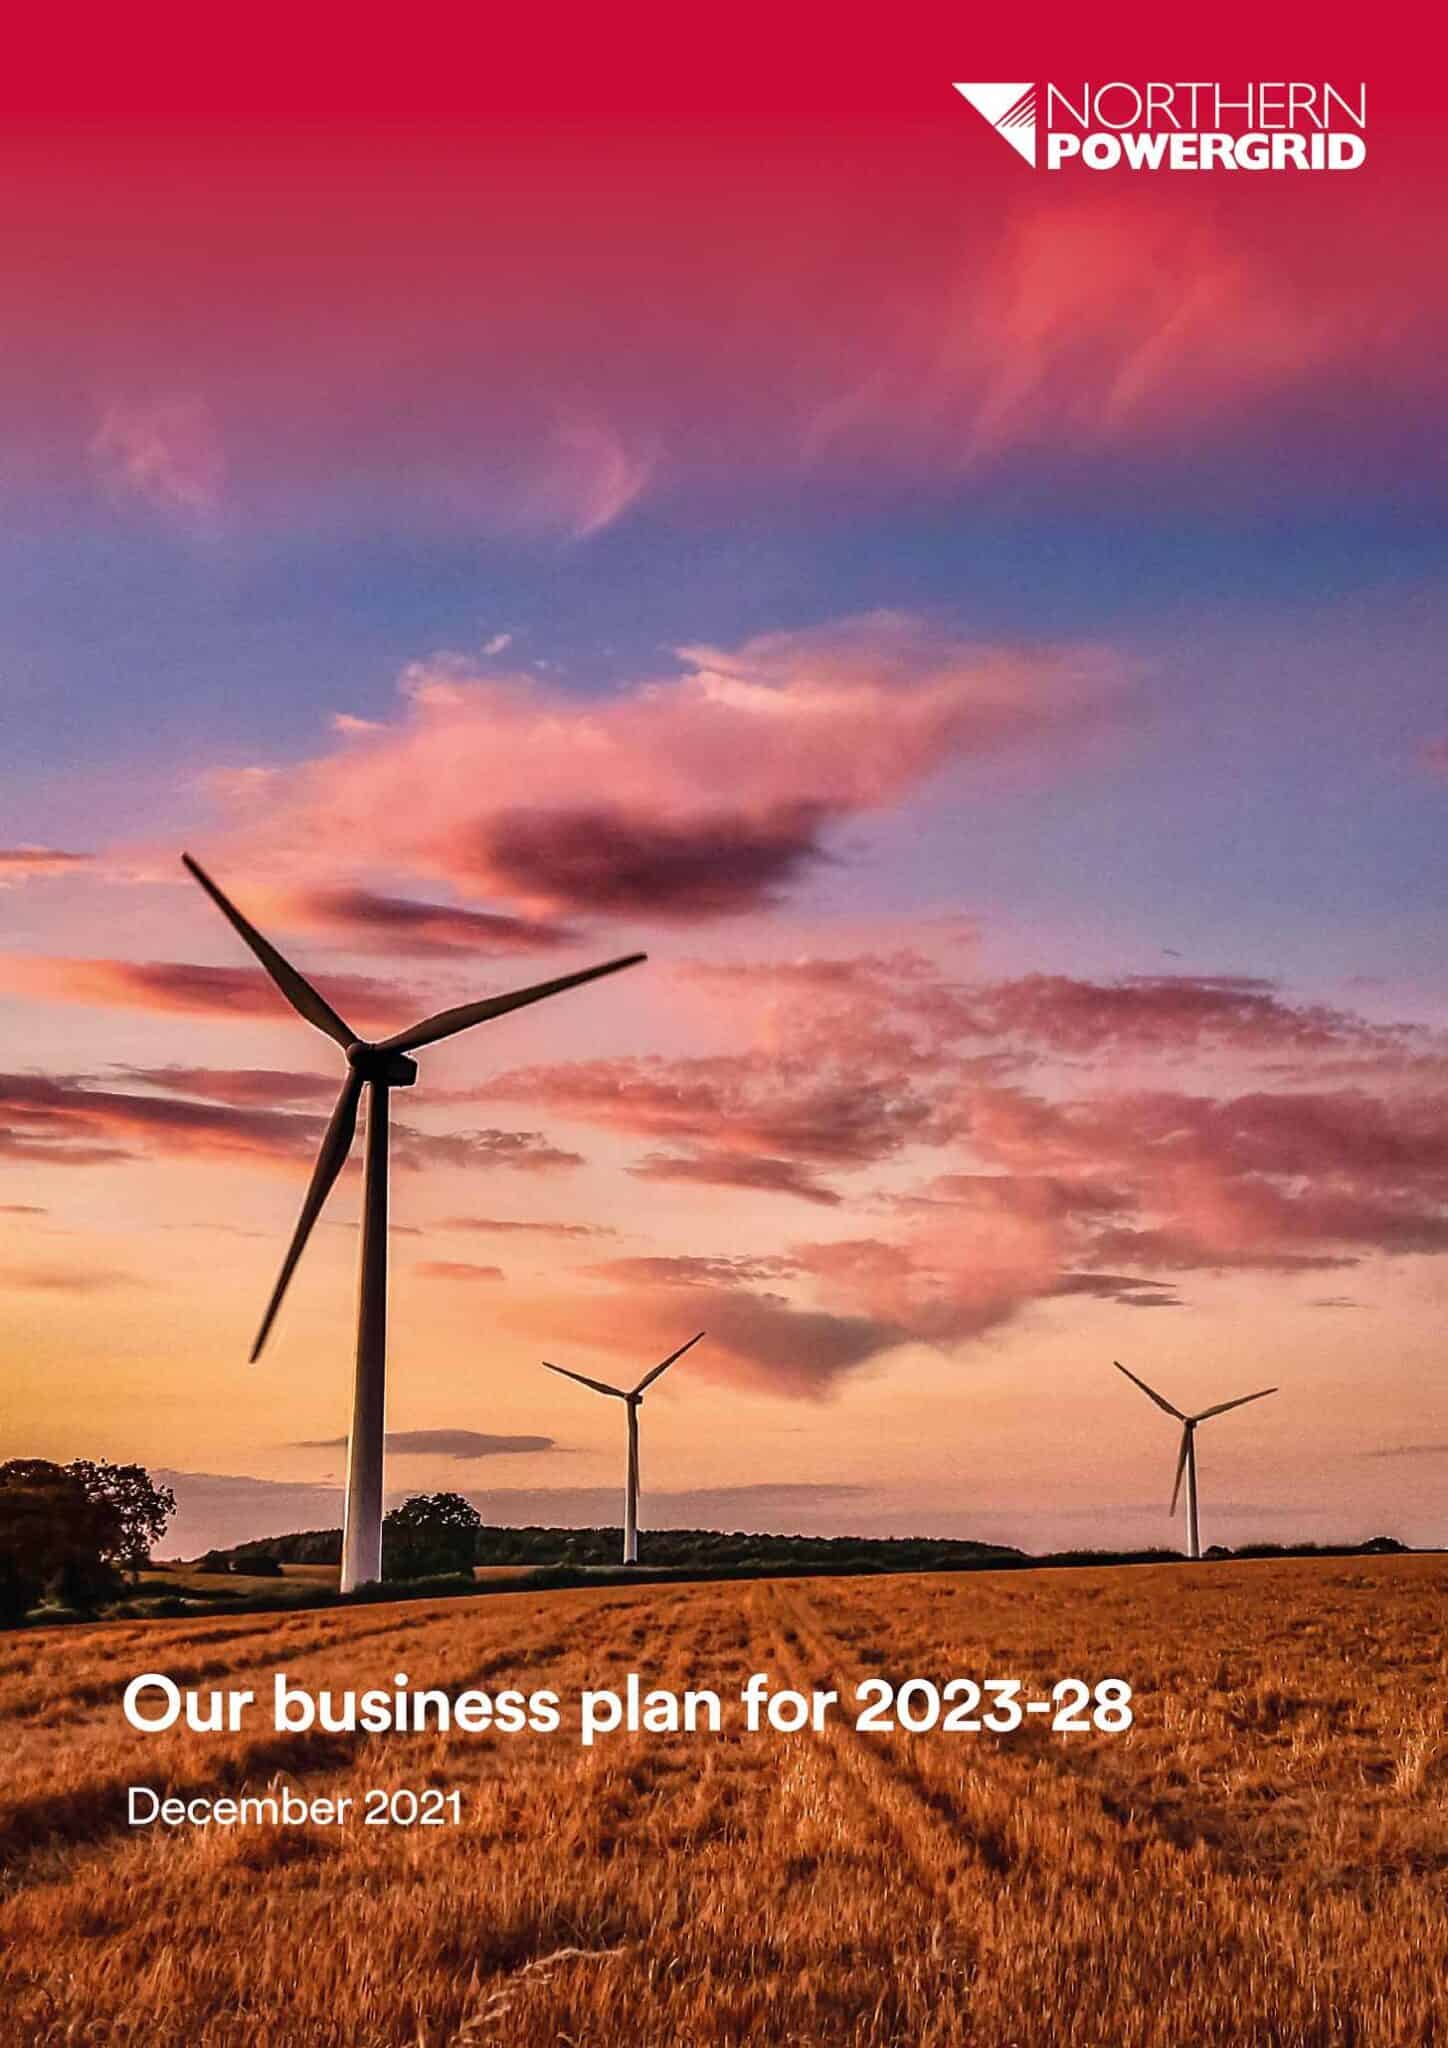 Front cover of the "Our business plan for 2023-28"